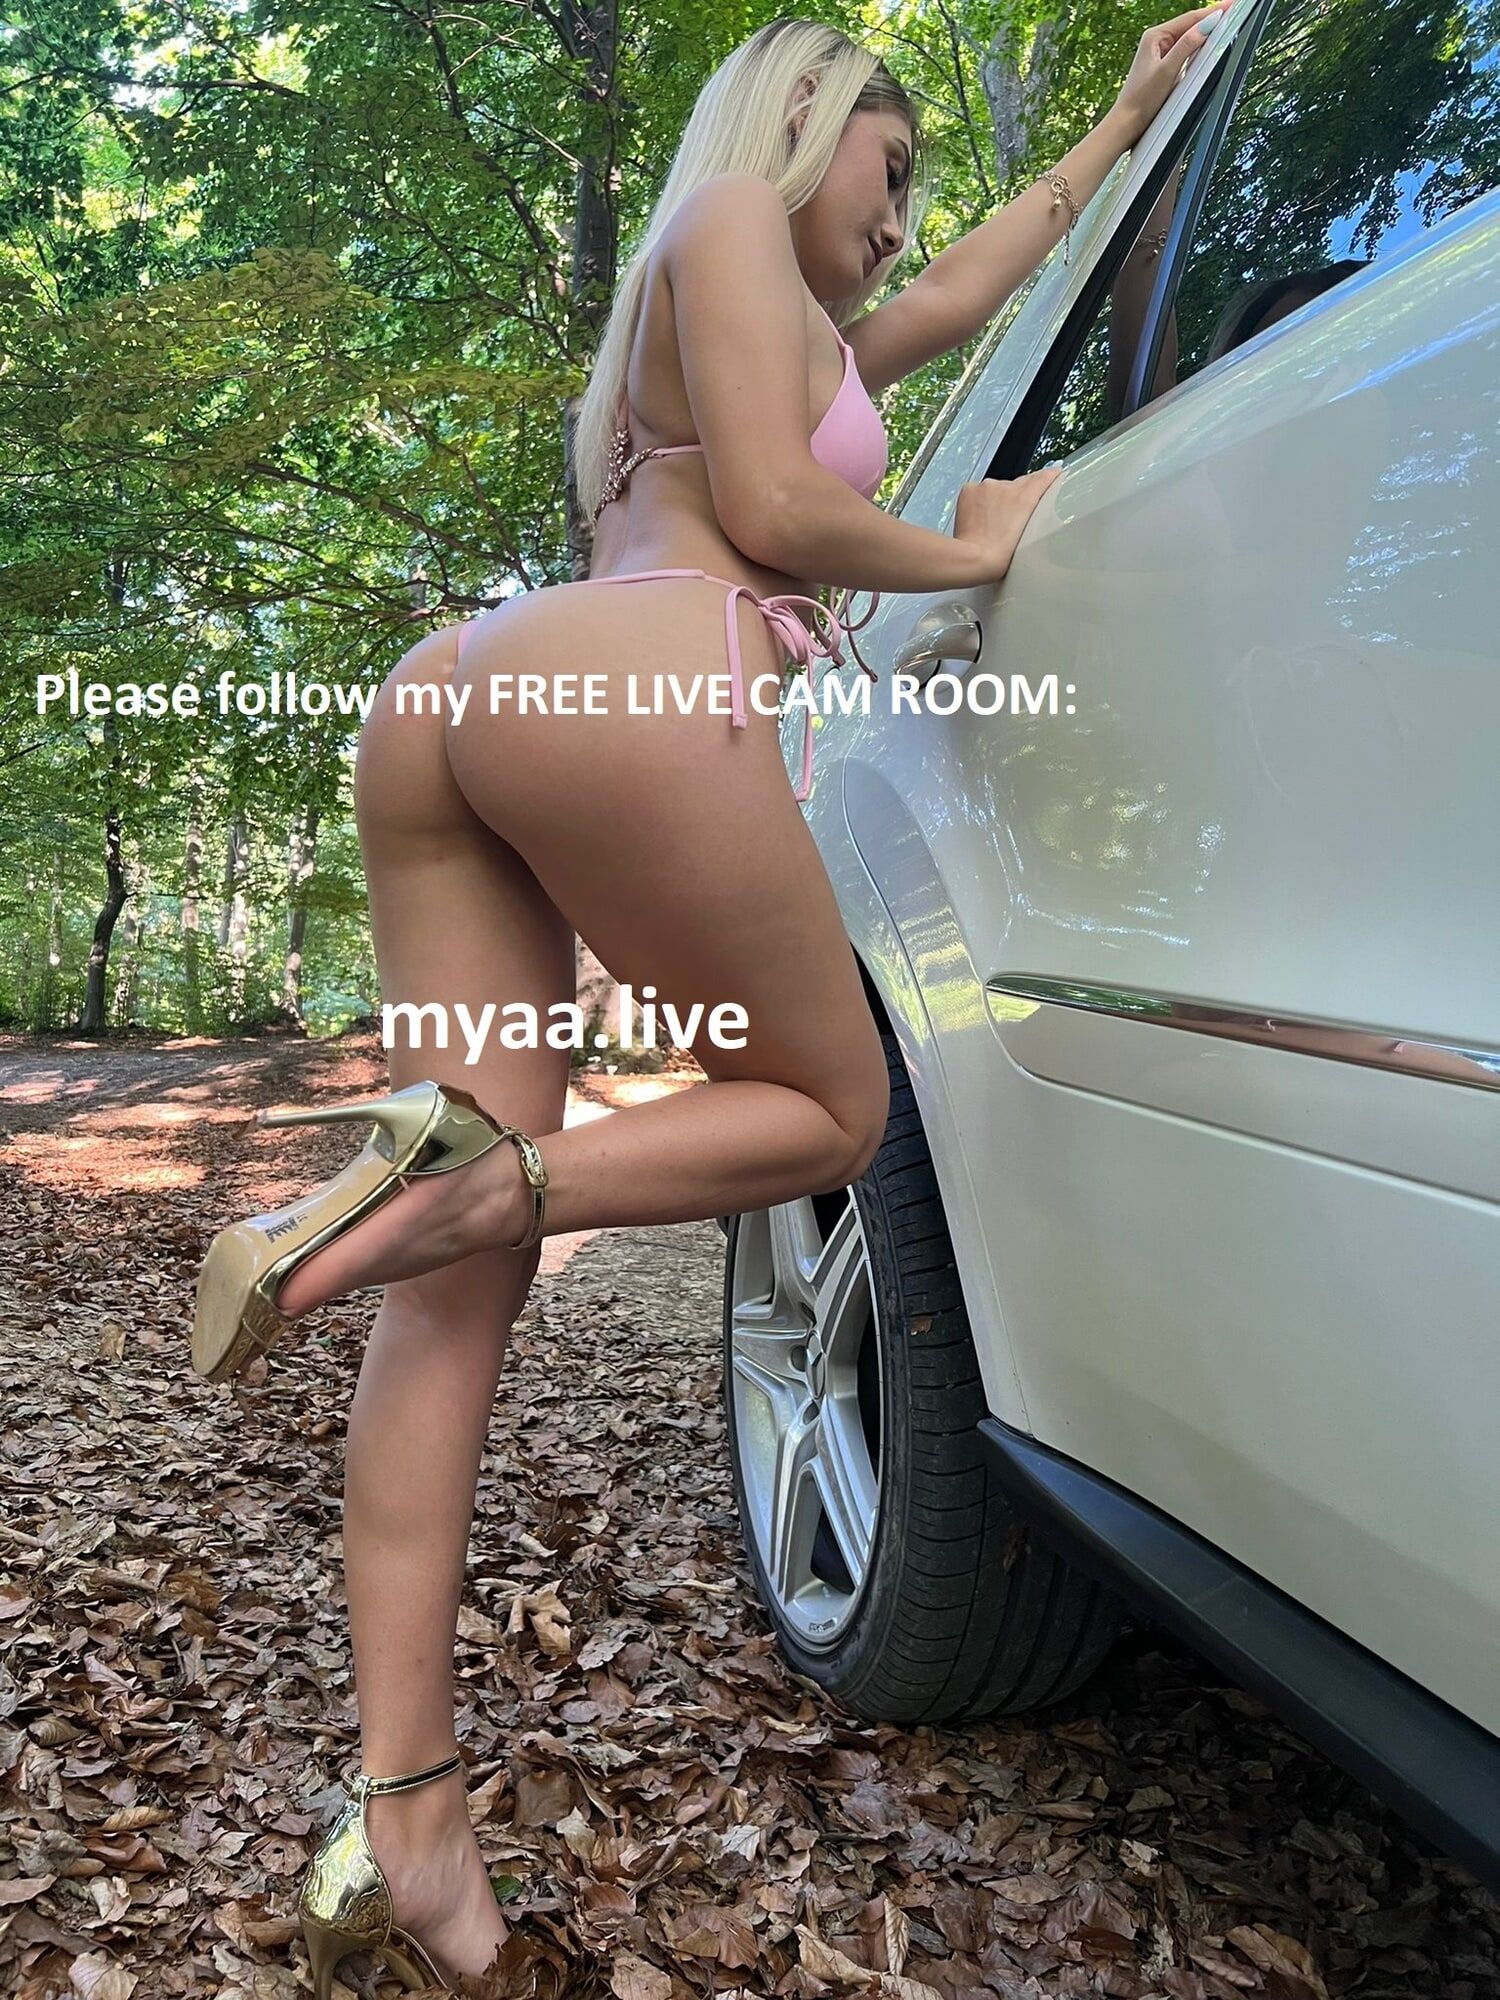 Outdoor pics, on my car and in my car spreading legs, in sex #5